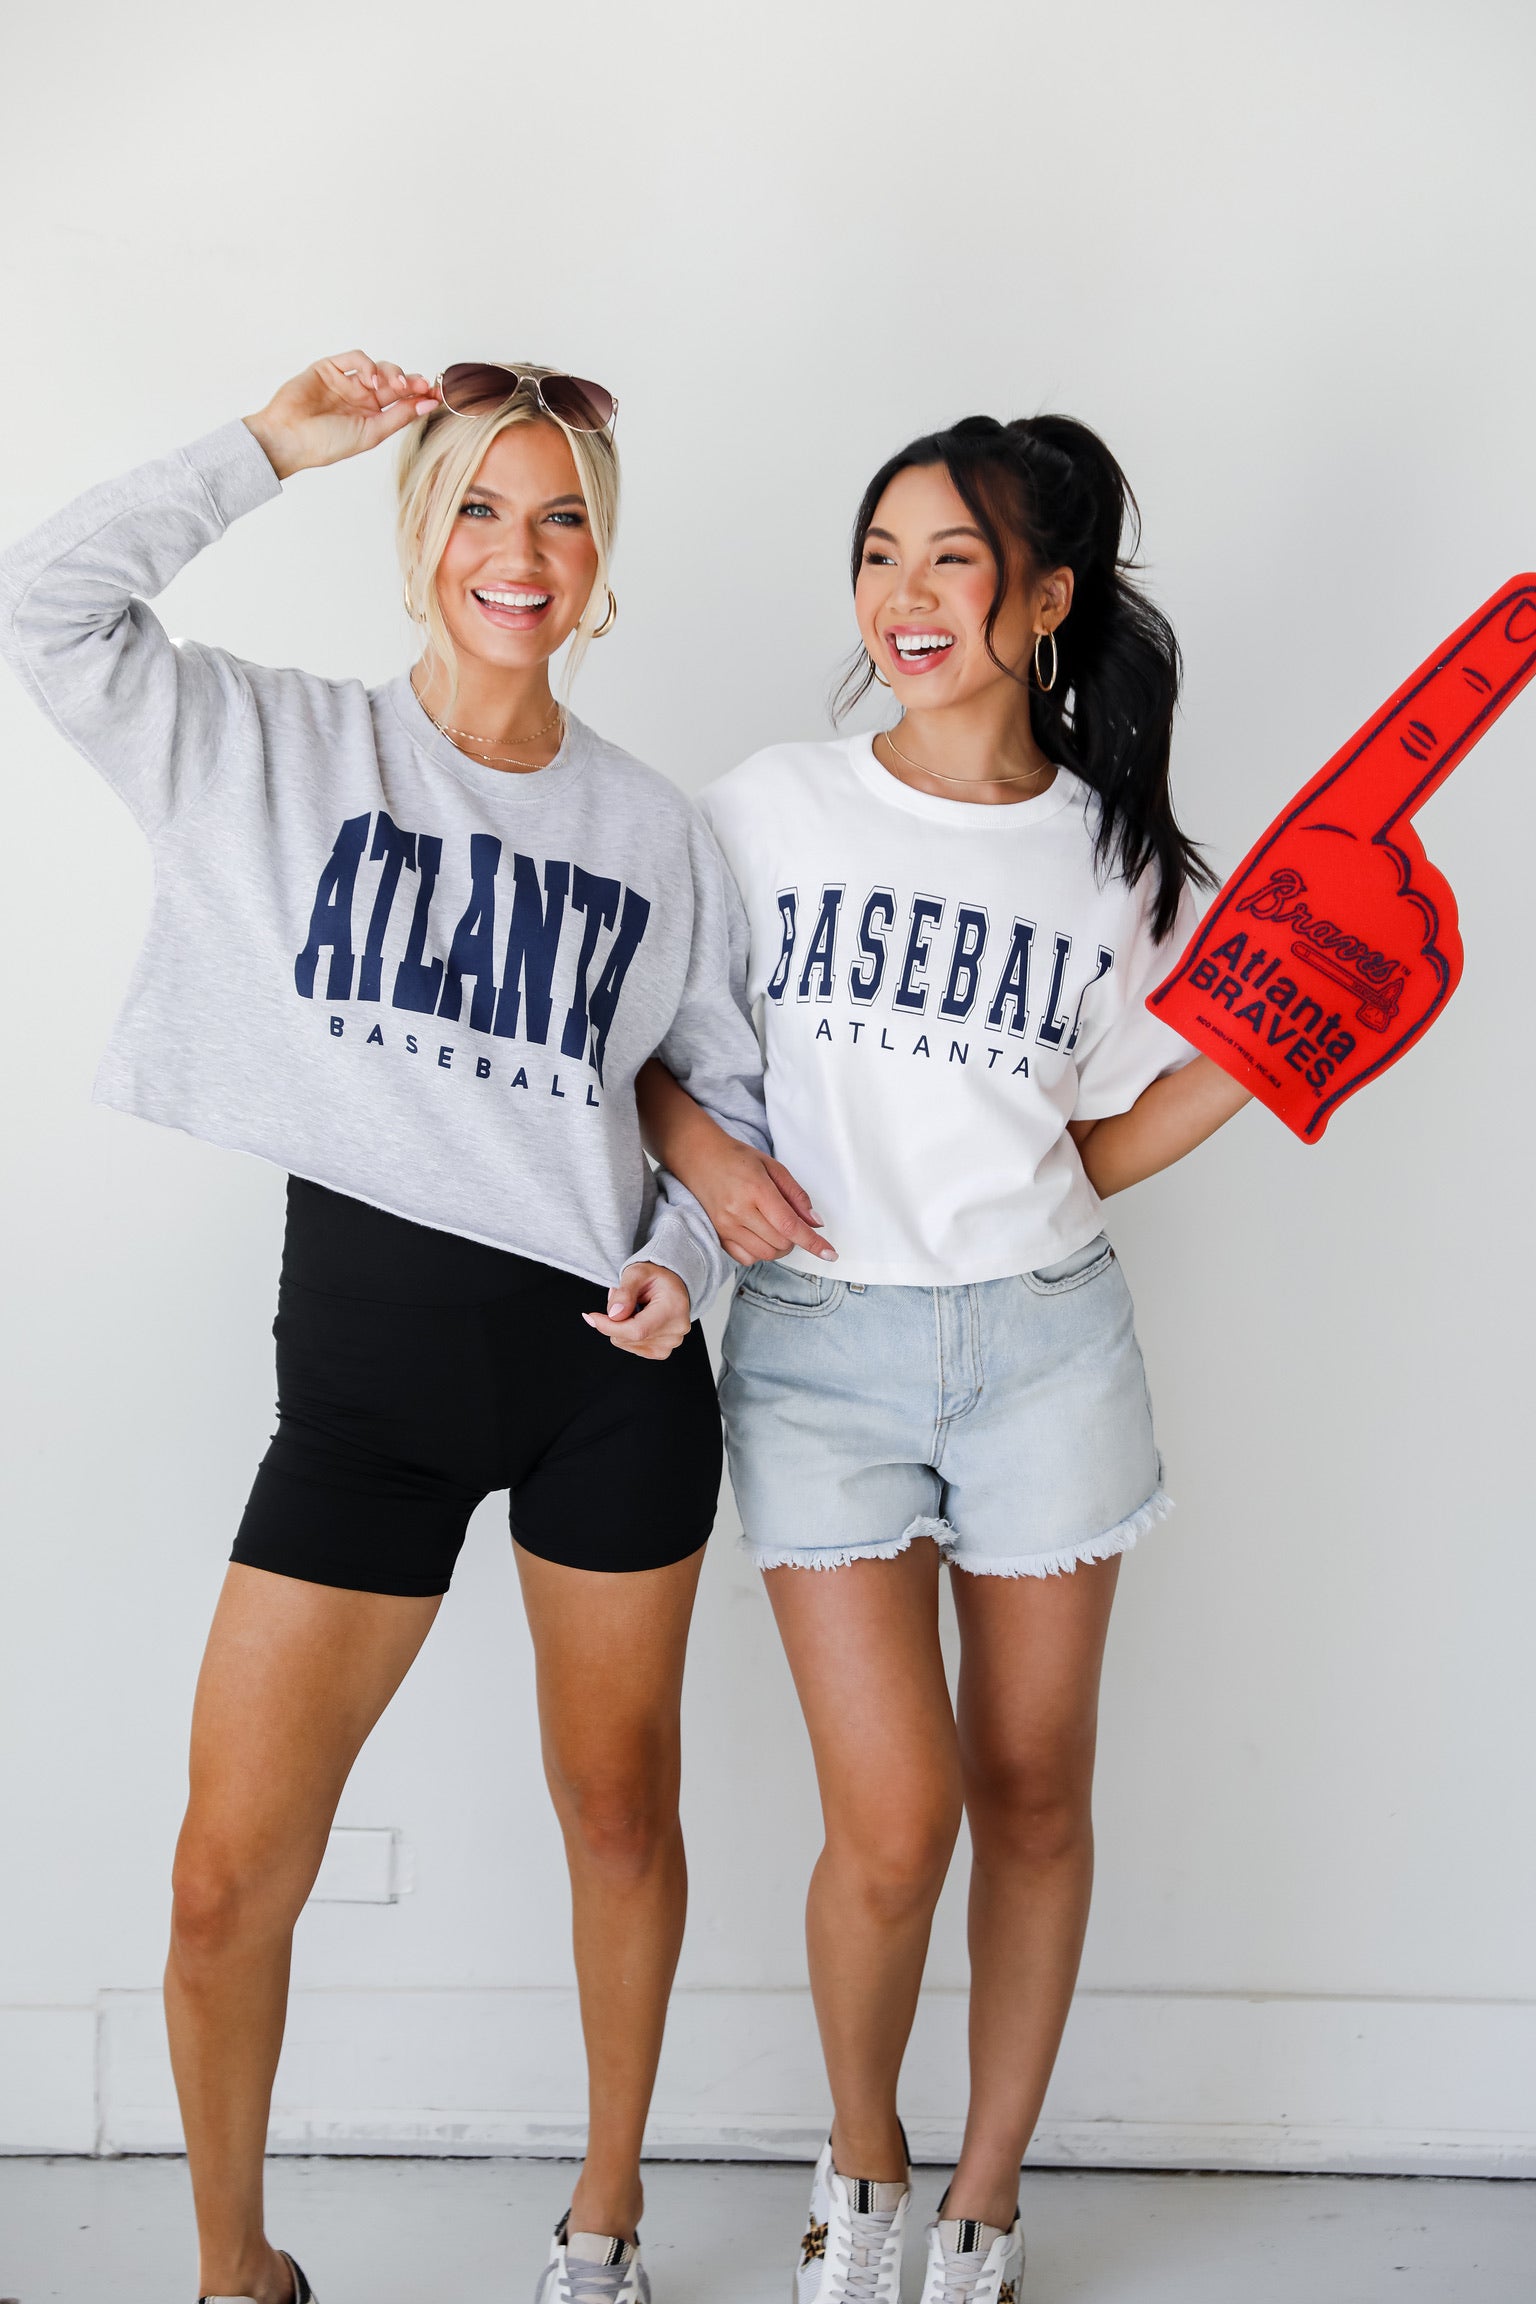 braves cropped tee